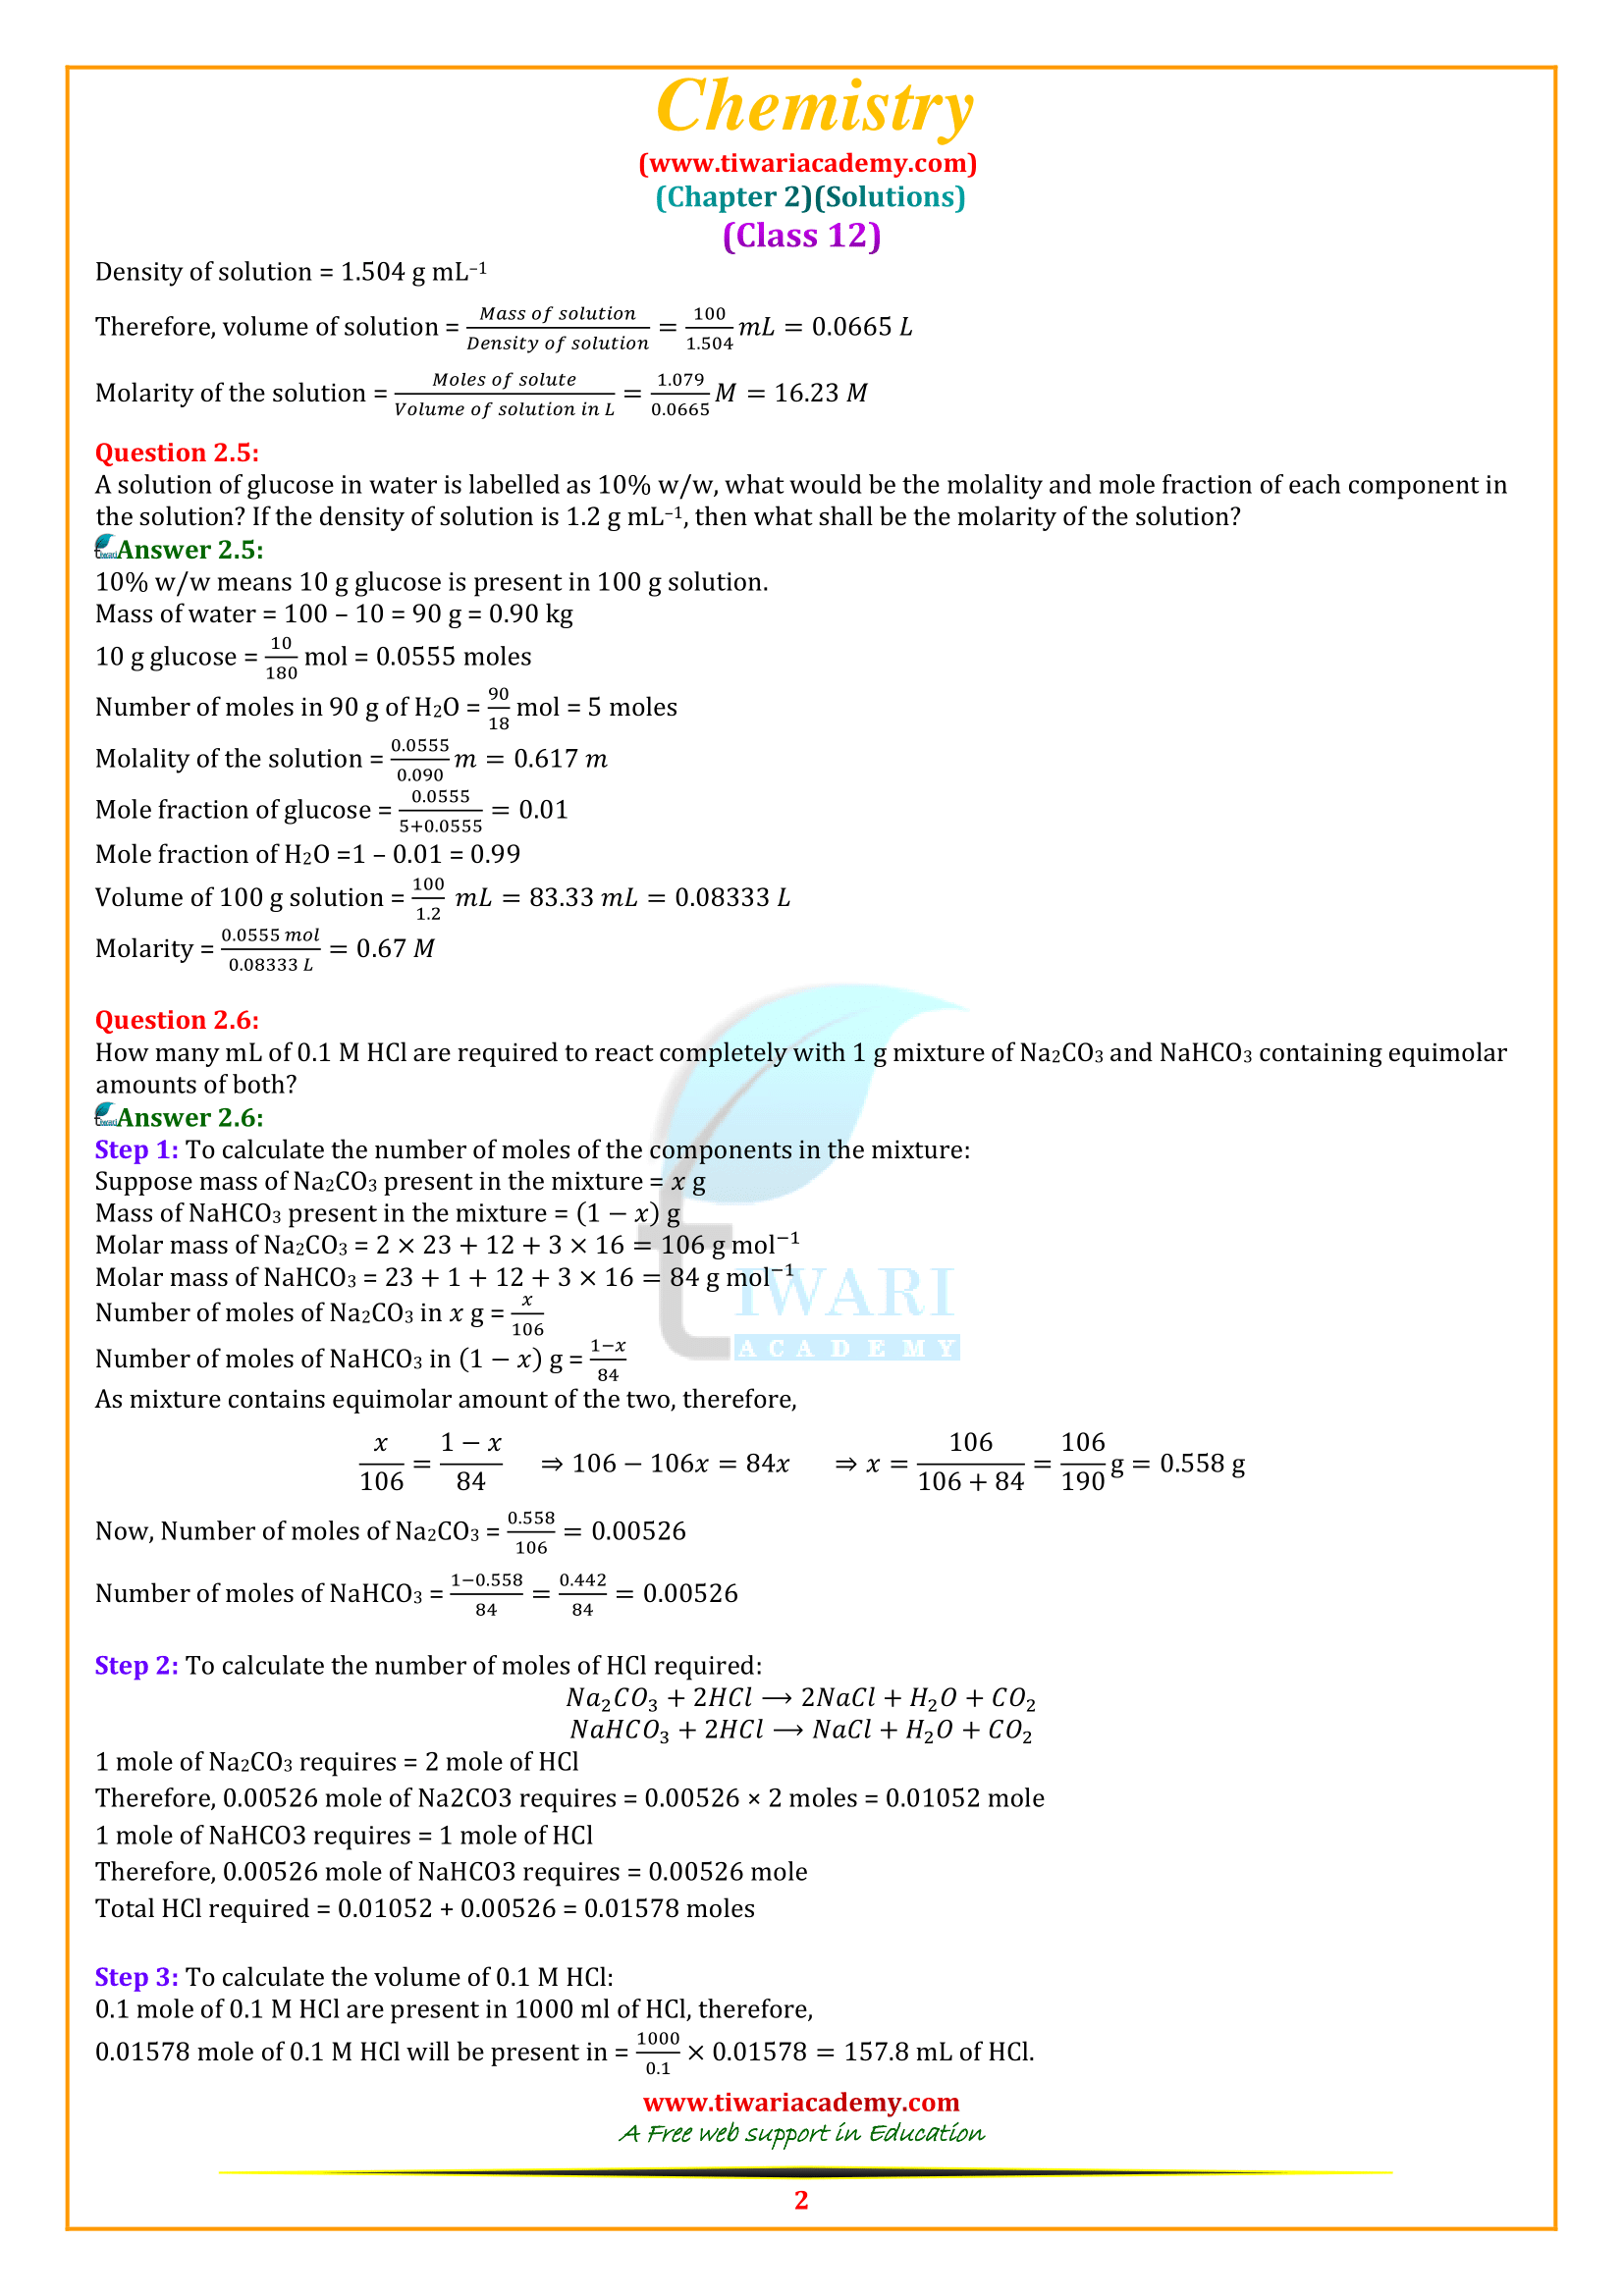 NCERT Solutions for Class 12 Chemistry Chapter 2 in PDF